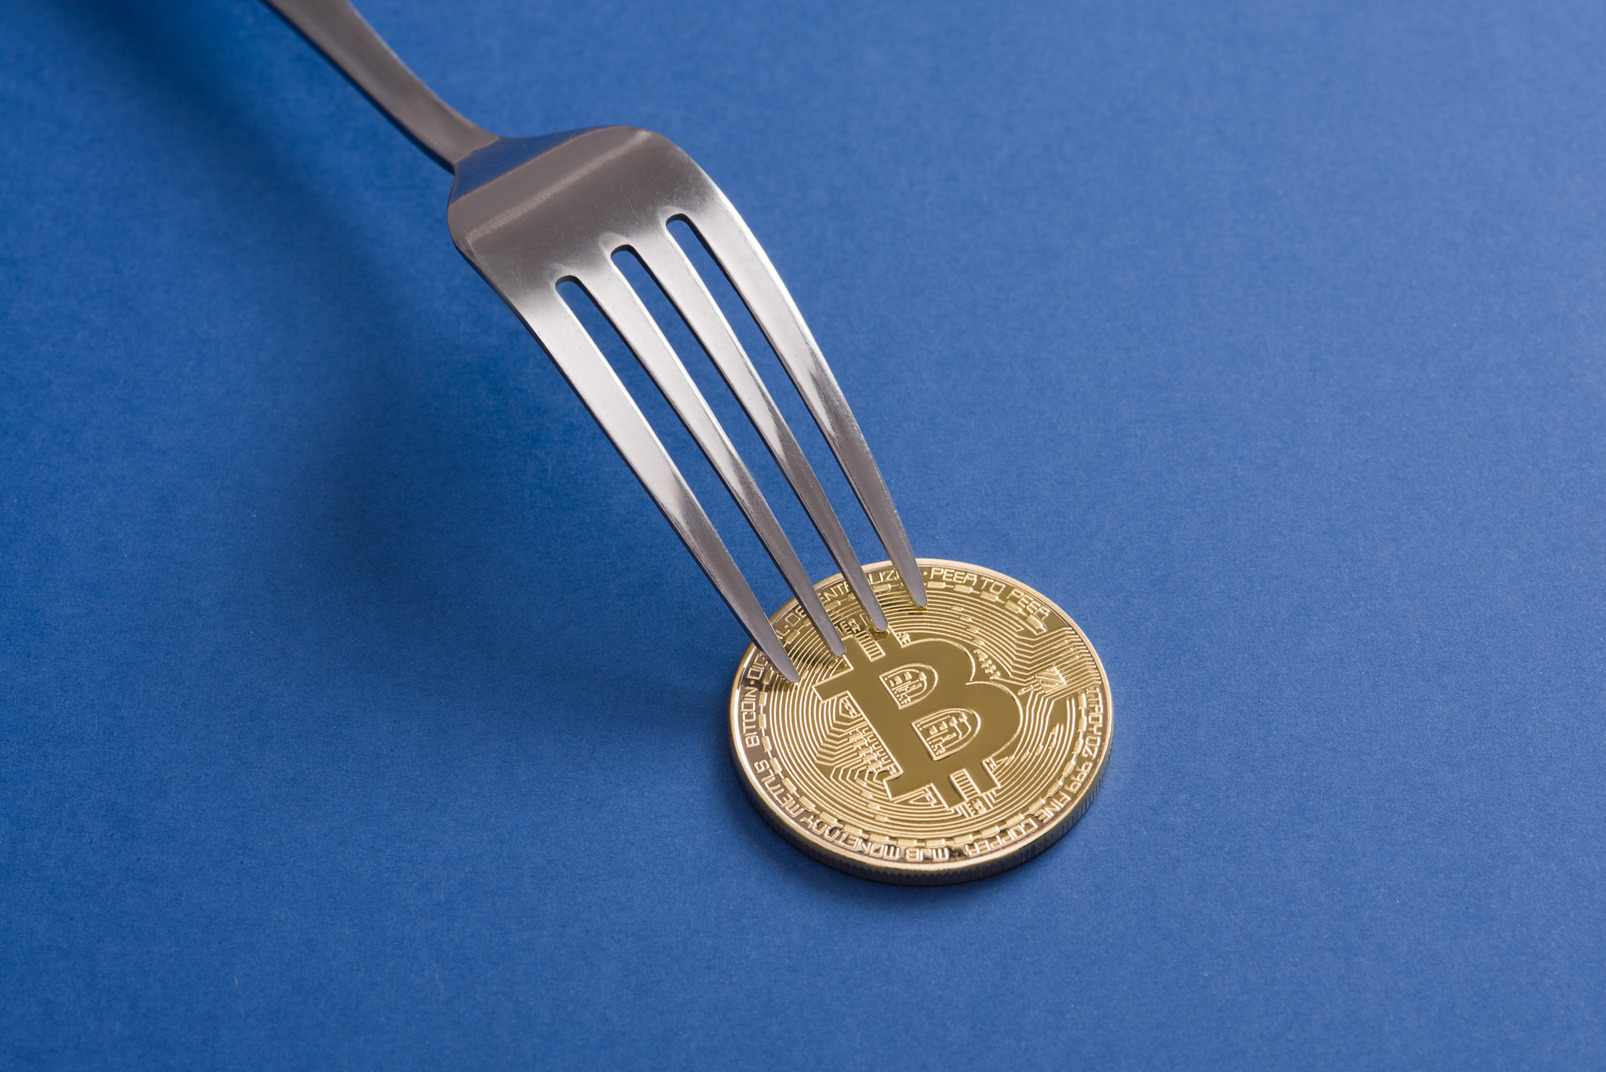 Some food for thought about bitcoin